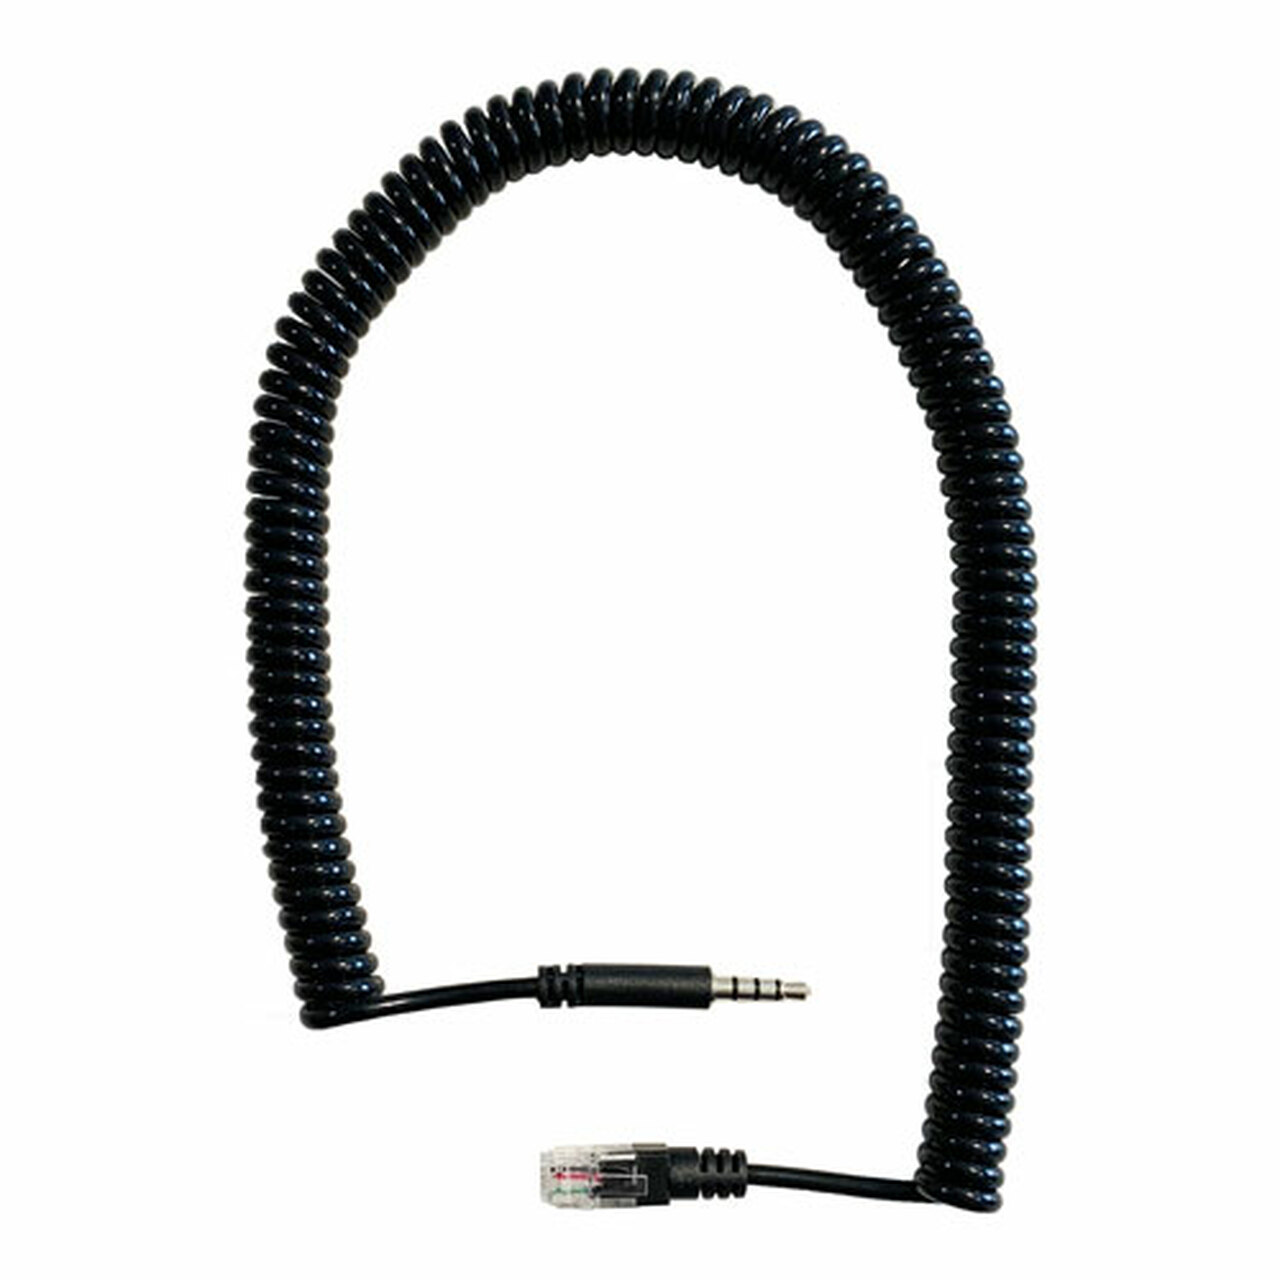 Headset Buddy 35M-RJ9M EXT - Male RJ9 to Male 3.5mm 10 Foot Extension Cable